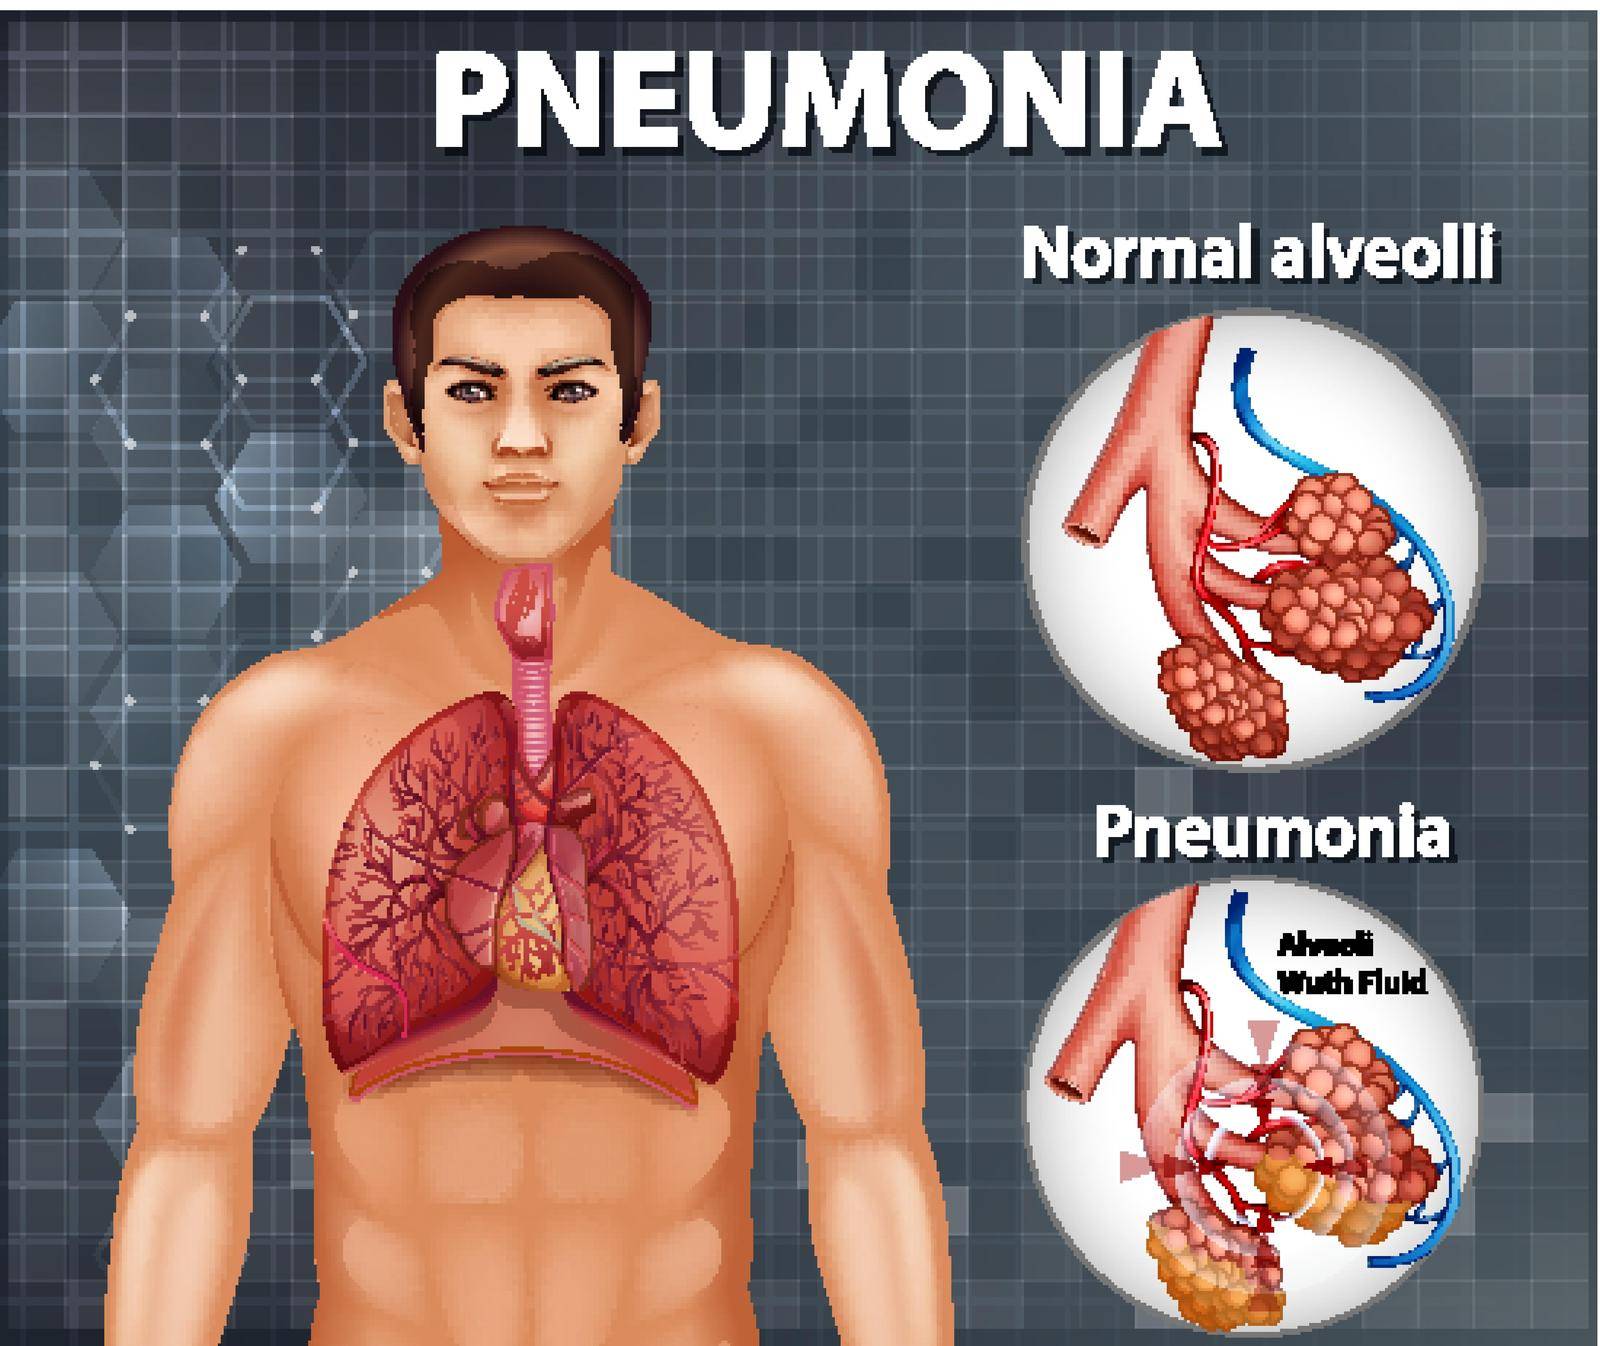 Comparison of healthy alveoli and Pneumonia by iimages